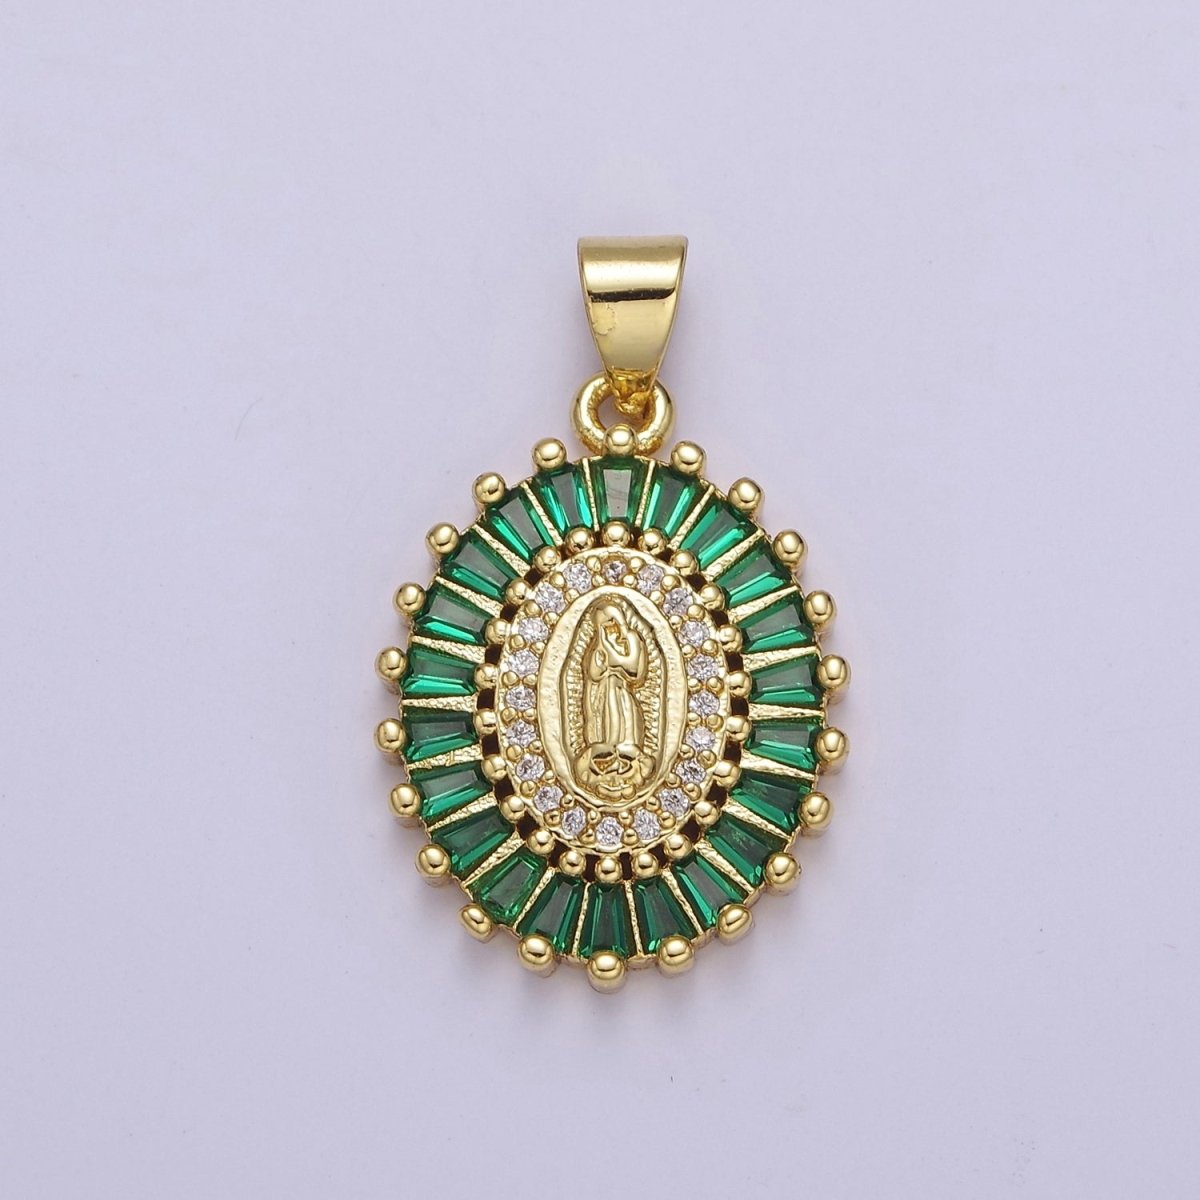 14K Gold Filled Baguette Lady Guadalupe Charm Virgin Mary Pendant Micro Pave Religious Catholic Jewelry J-498 J-499 J-501 - DLUXCA